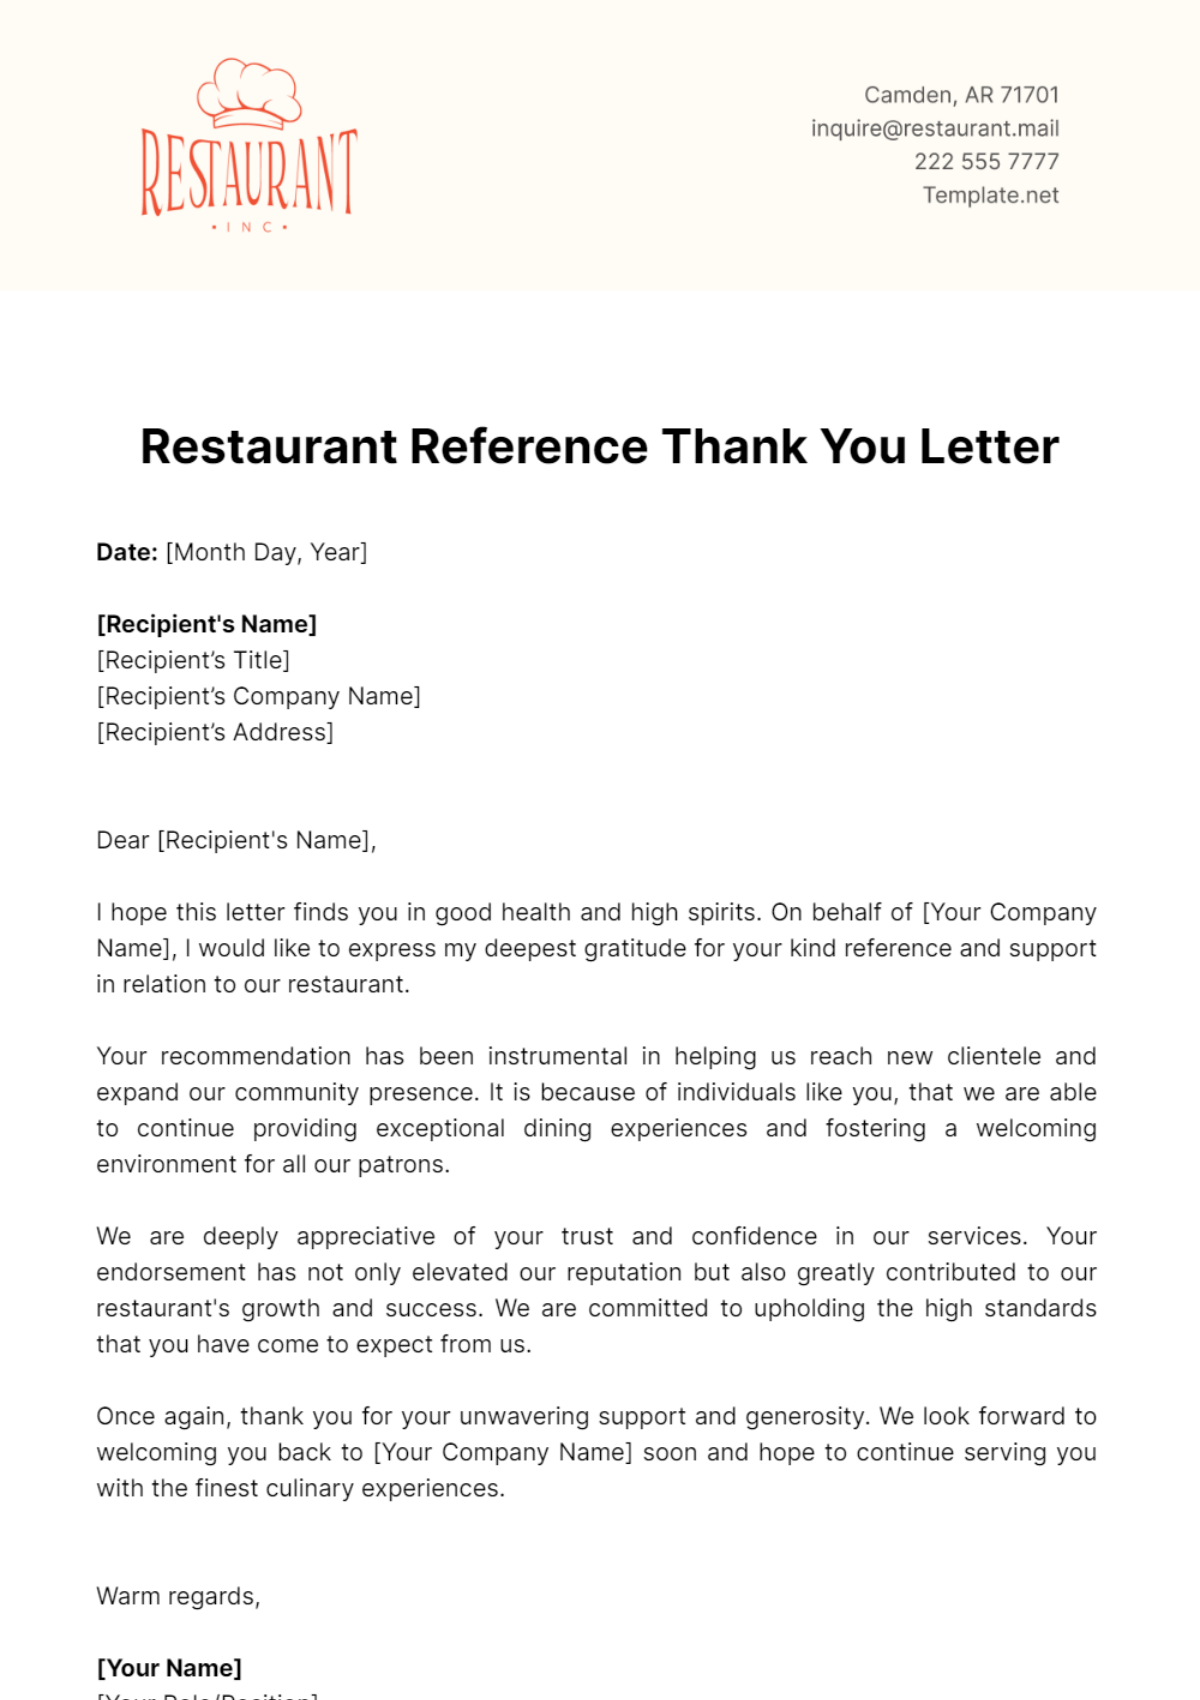 Free Restaurant Reference Thank You Letter Template